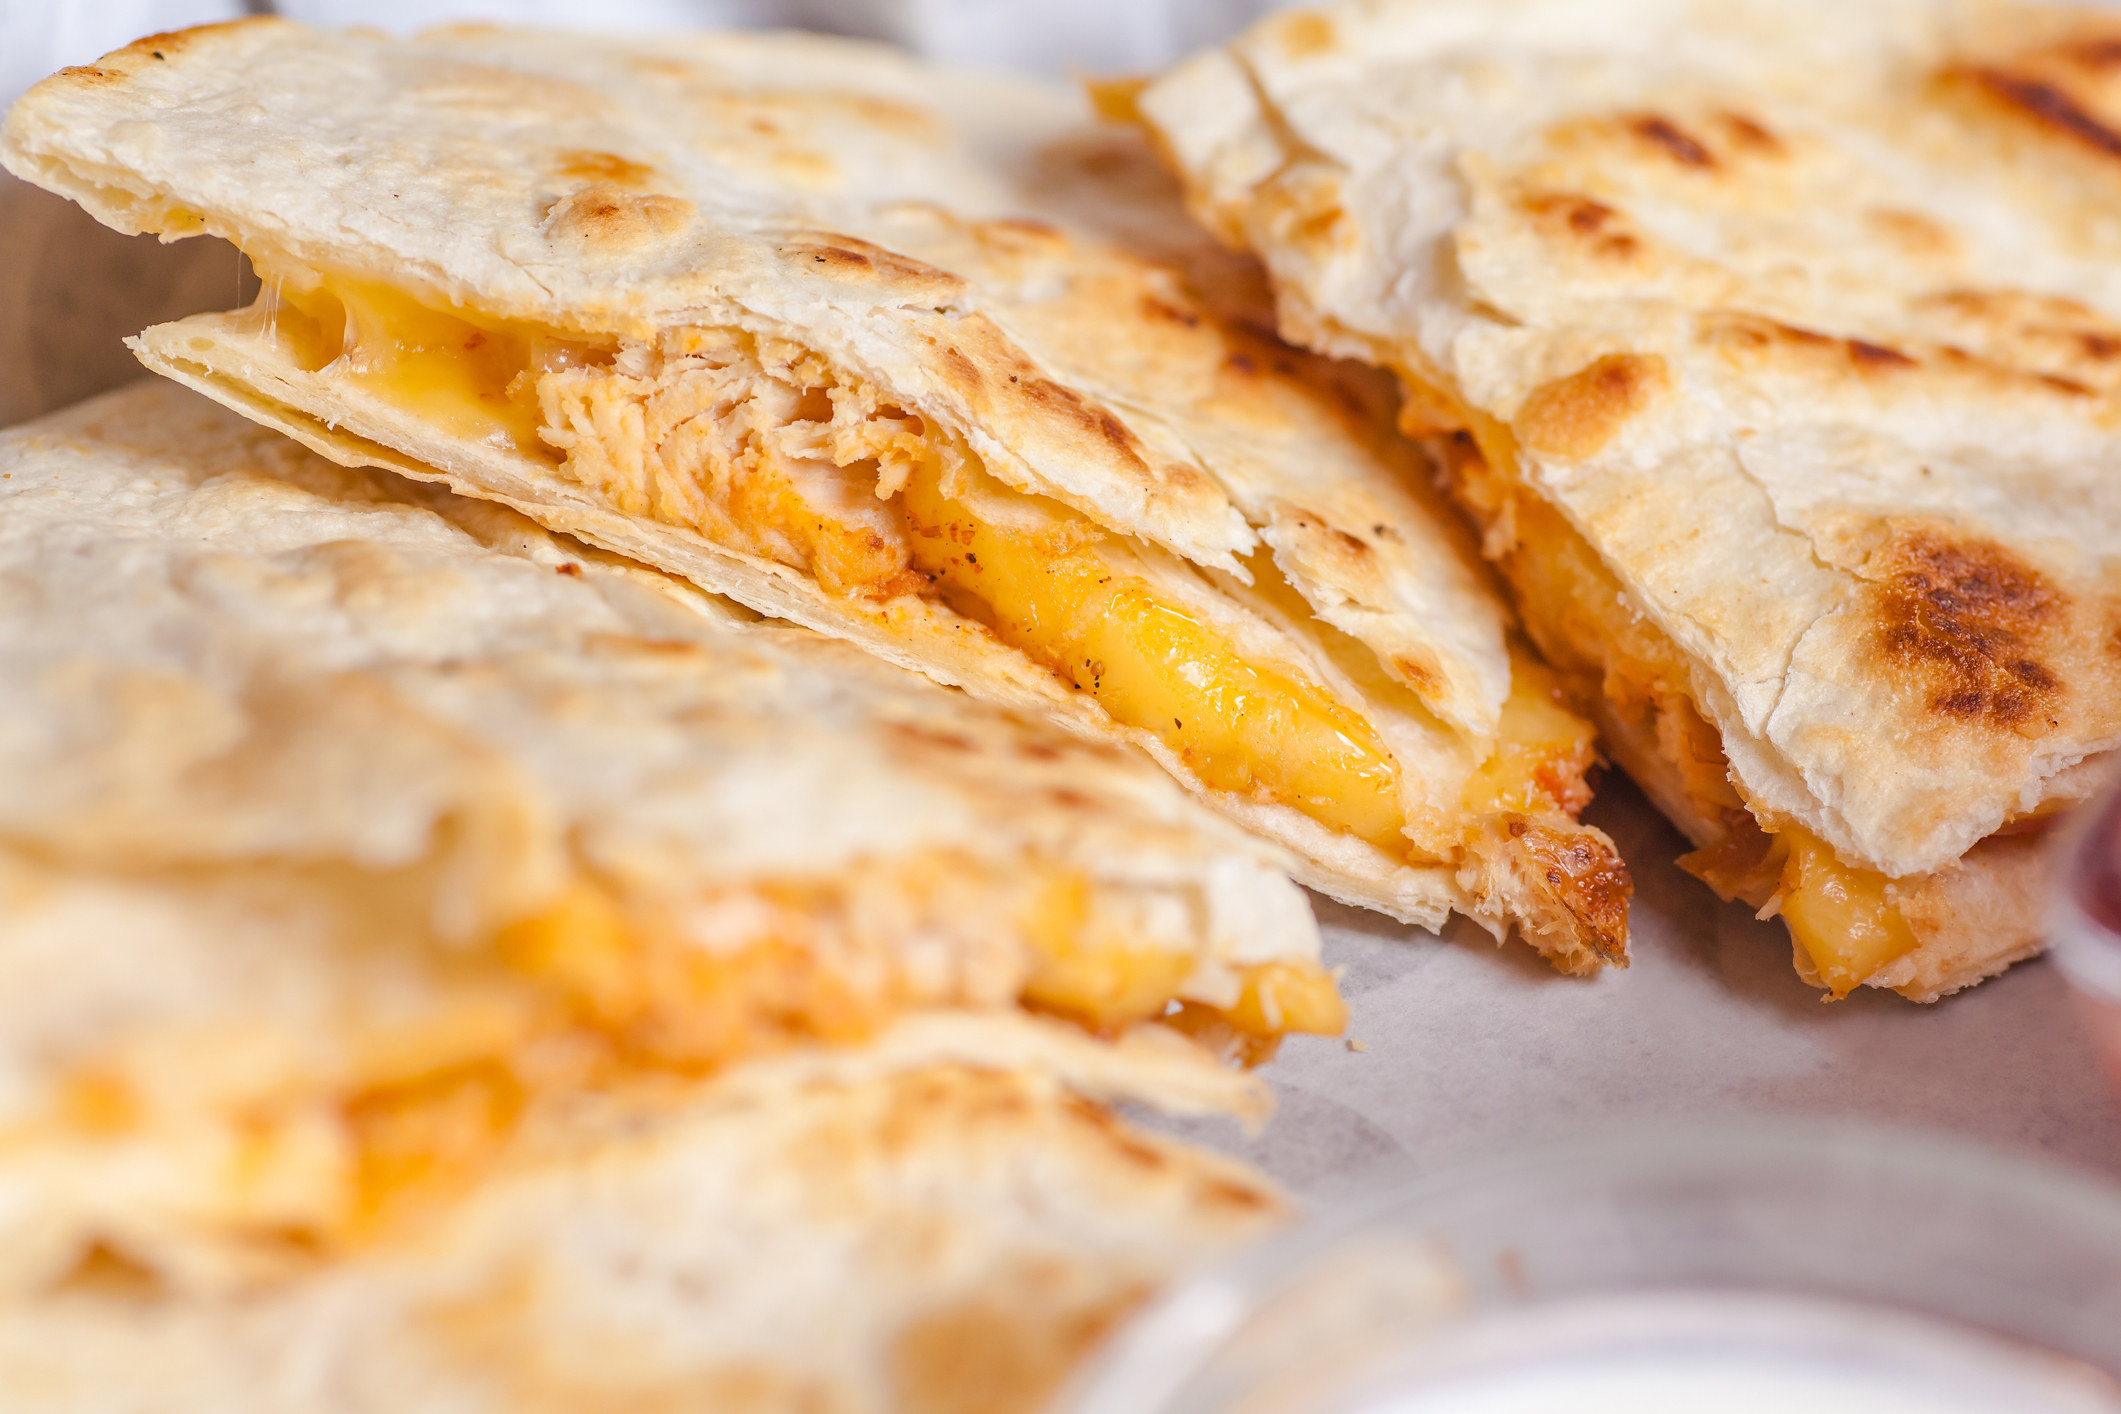 A cheese quesadilla cut into slices.